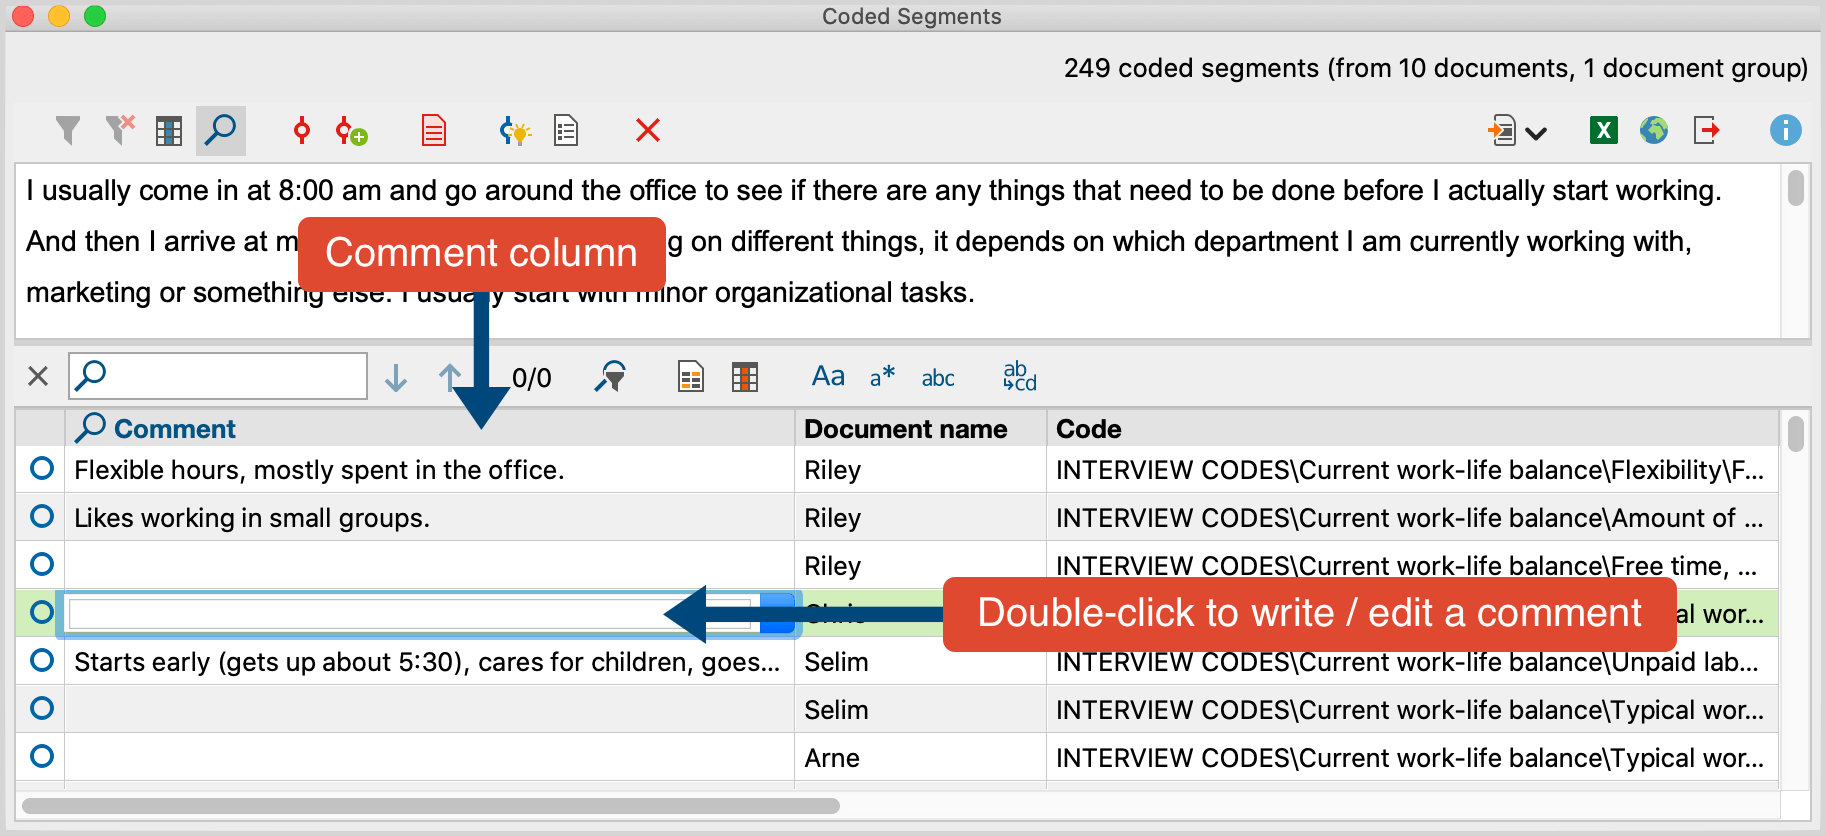 Create, edit and search for comments in the “Overview of Coded Segments“